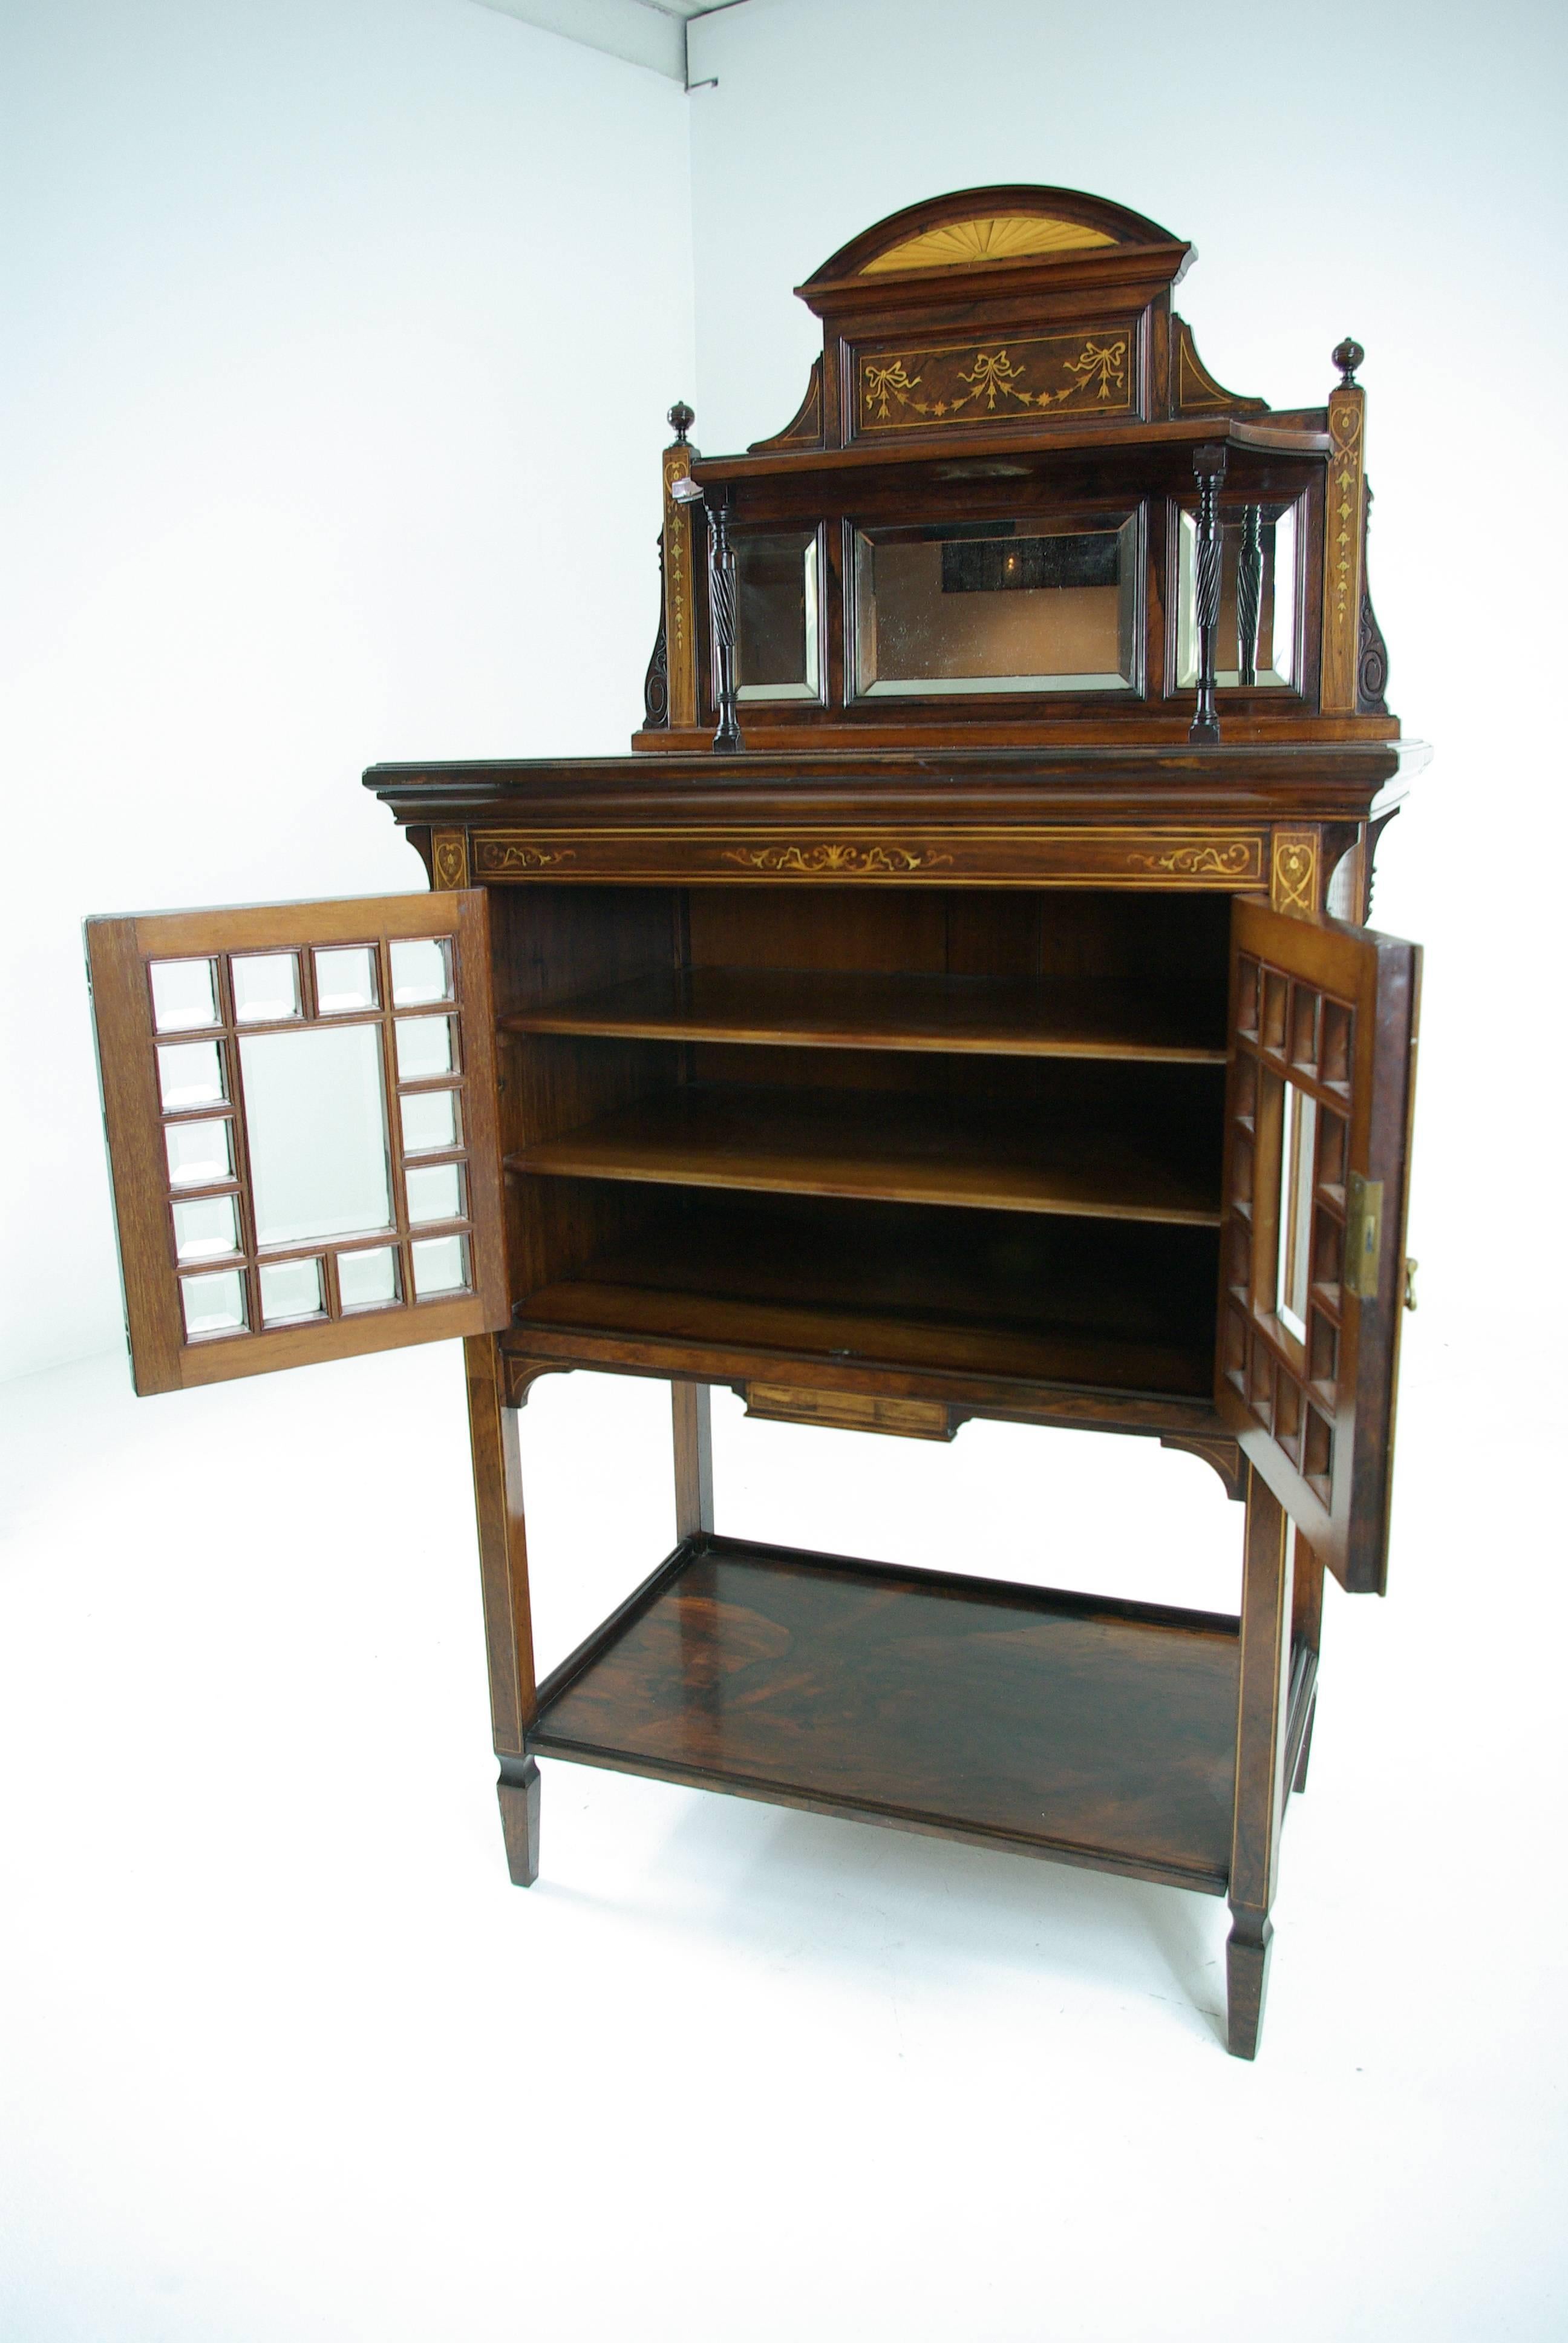 Antique Display Cabinet,  Walnut Inlaid Music Stand, Scotland 1870, B581 

Scotland
1870
All Original Finish
Mirrored Inlaid Gallery with Three Beveled Mirrors
Two Beveled Glass Doors revealing Two Shelves
Open Shelf Below, Inlaid Sides
Wonderful